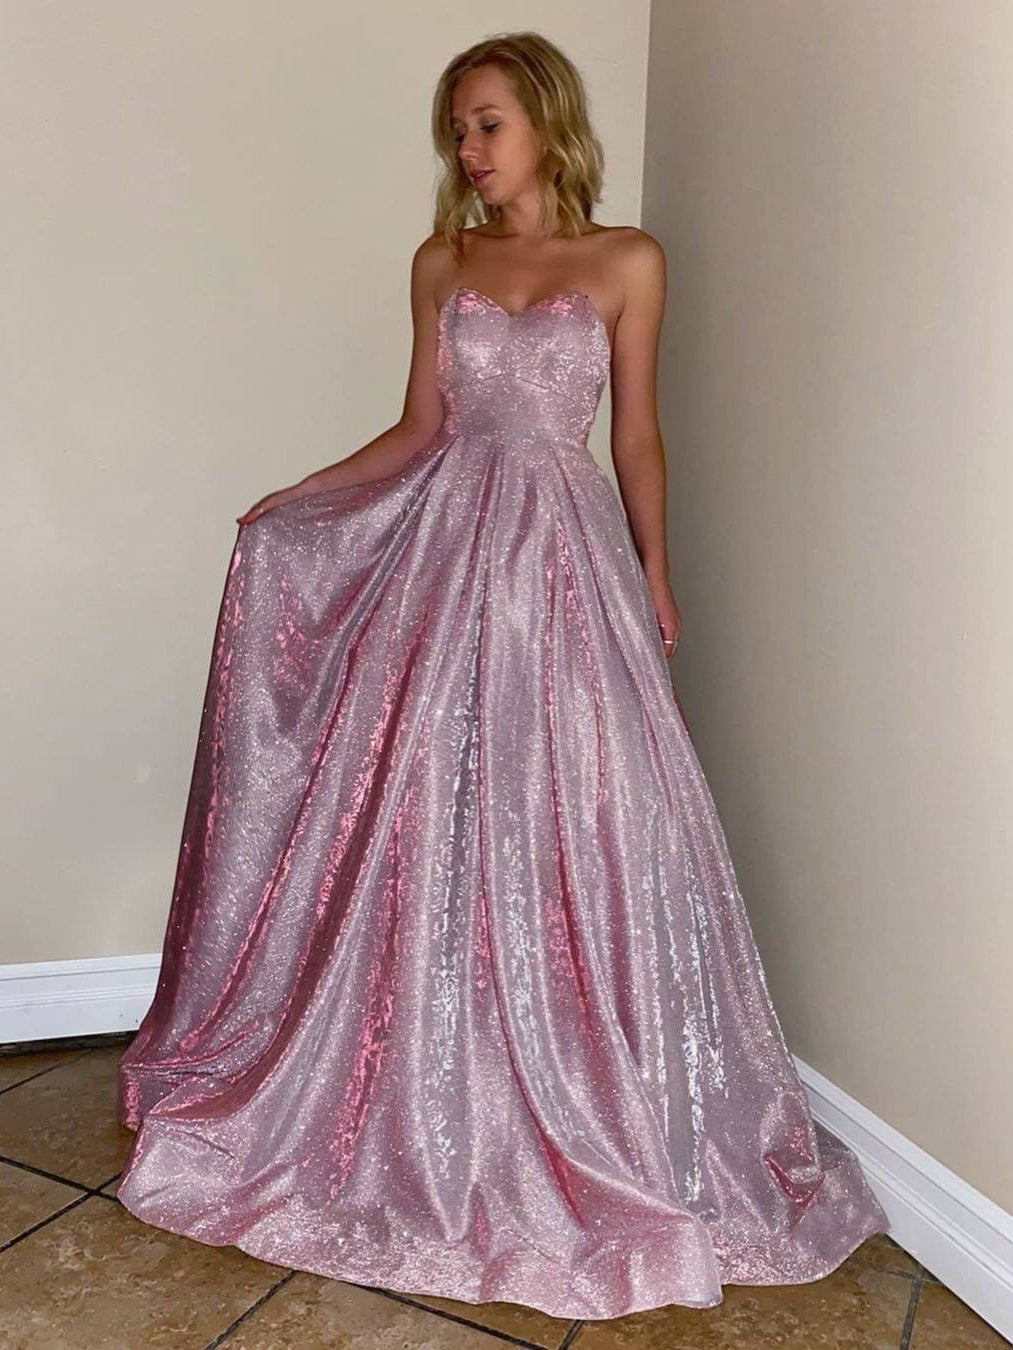 Sweetheart Long A-line Pink Shemmering Prom Dresses, Lovely Prom Dresses, 2020 Prom Dresses